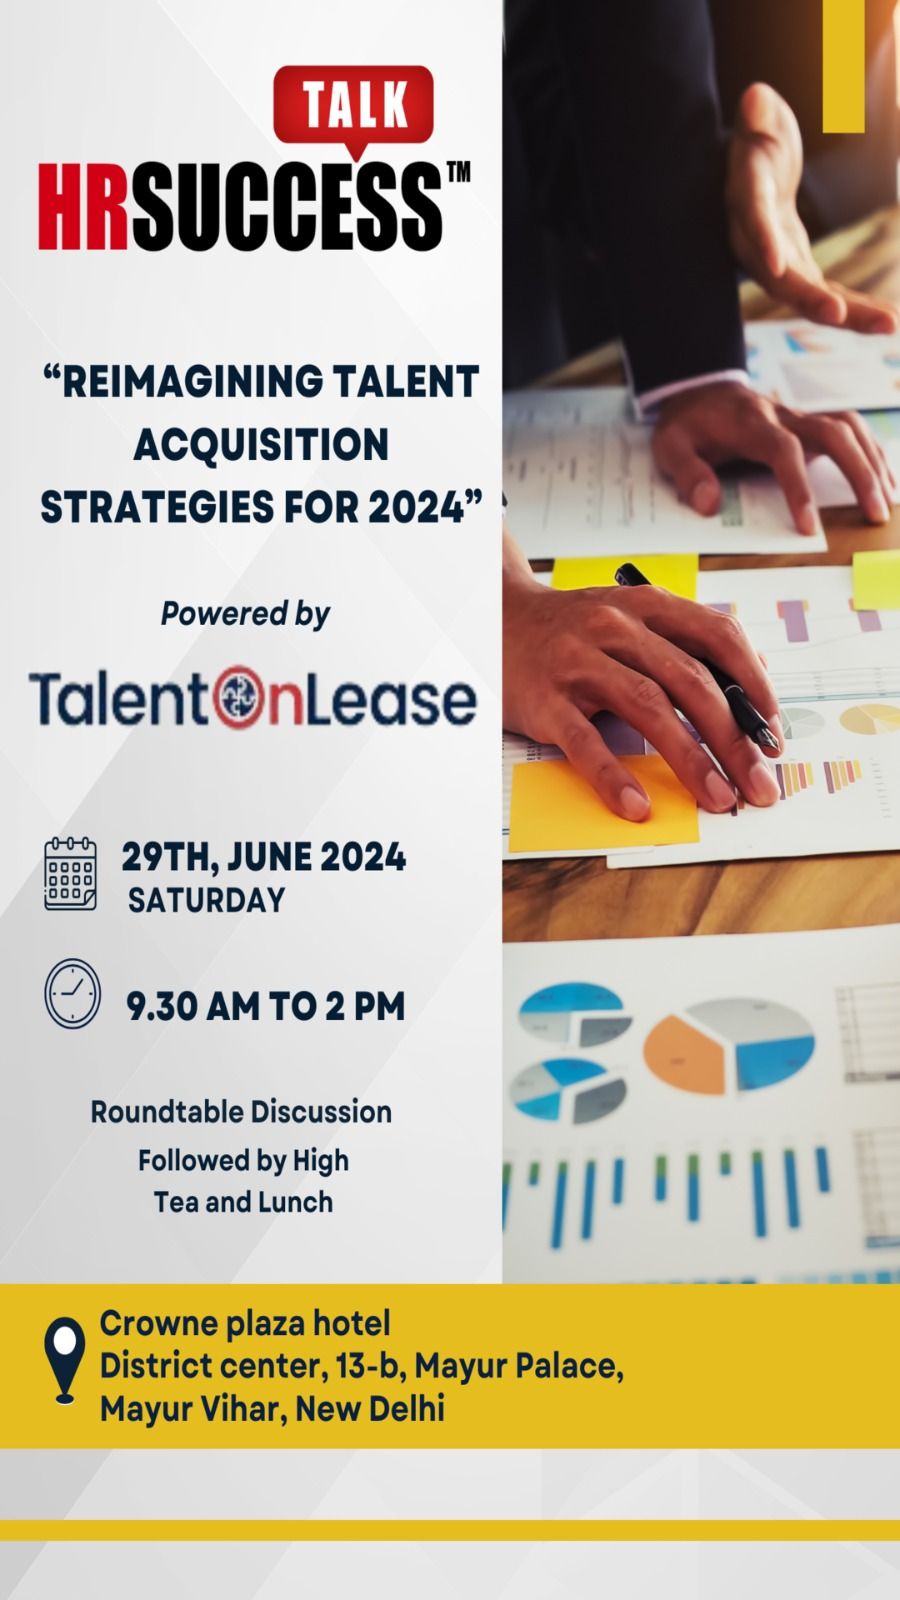 Round Table by TalentOnLease and HR SUCCESS TALK